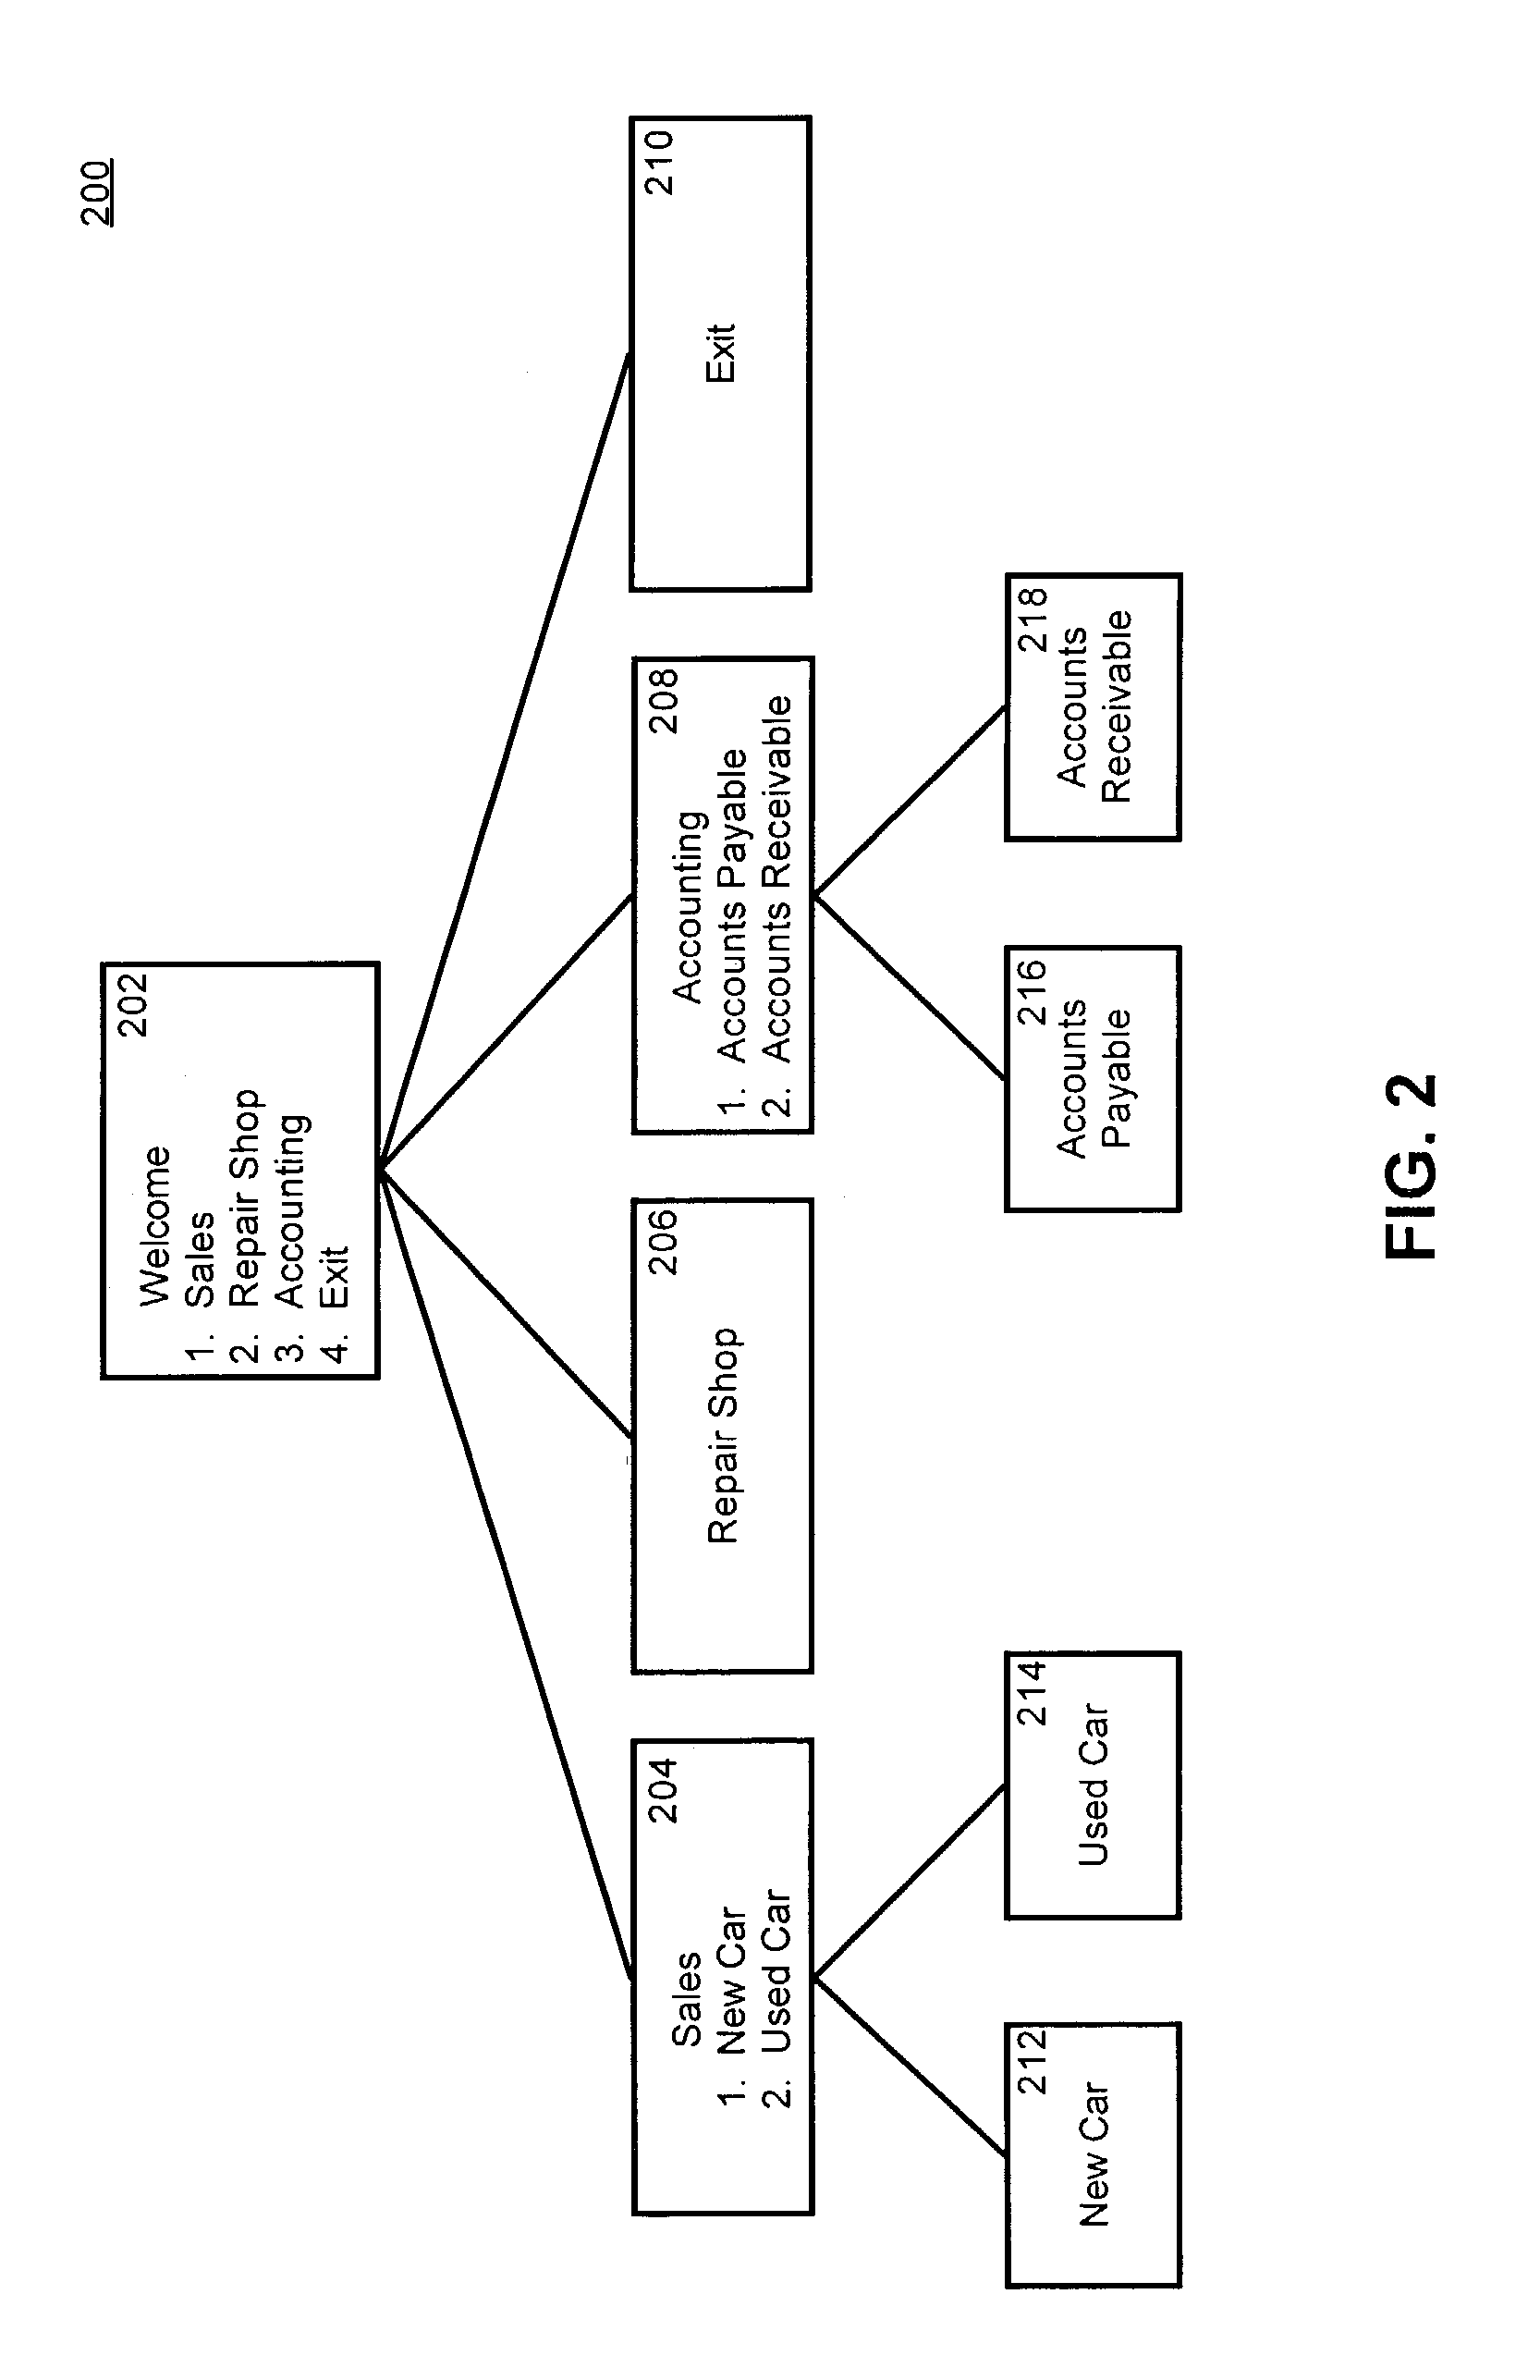 Telephony signals containing an IVR decision tree